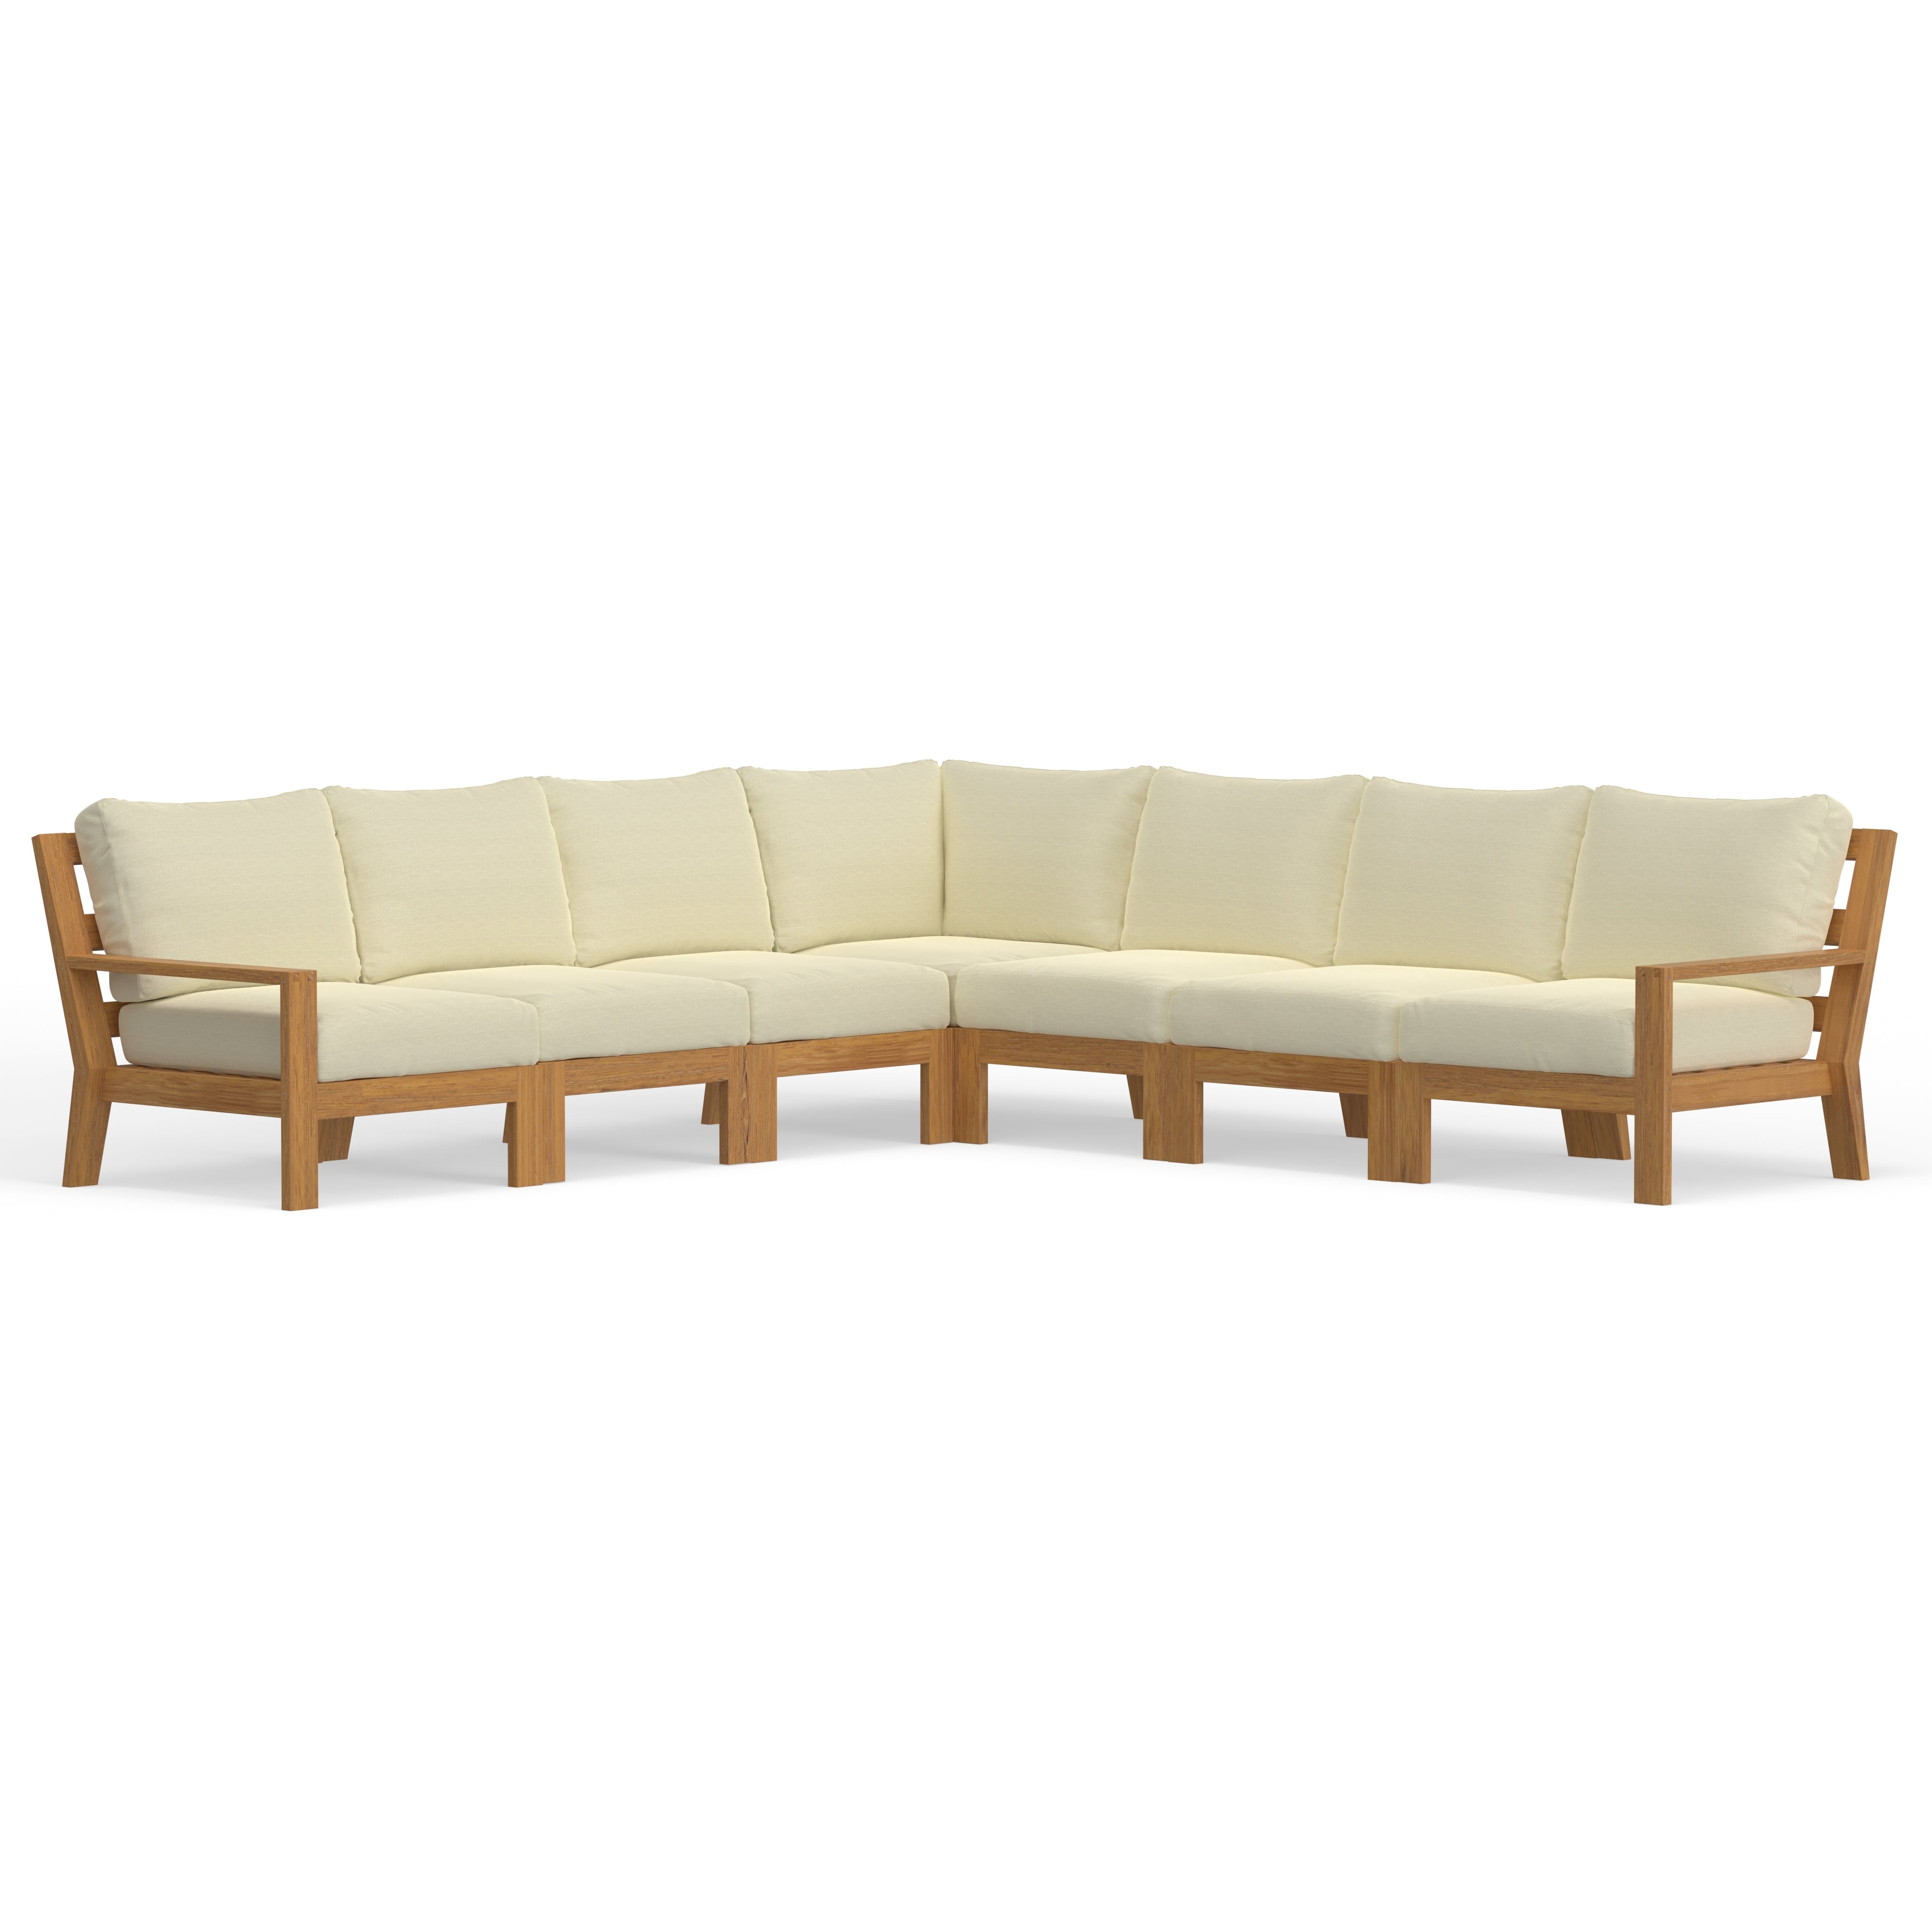 Natural Cushion Color Sectional